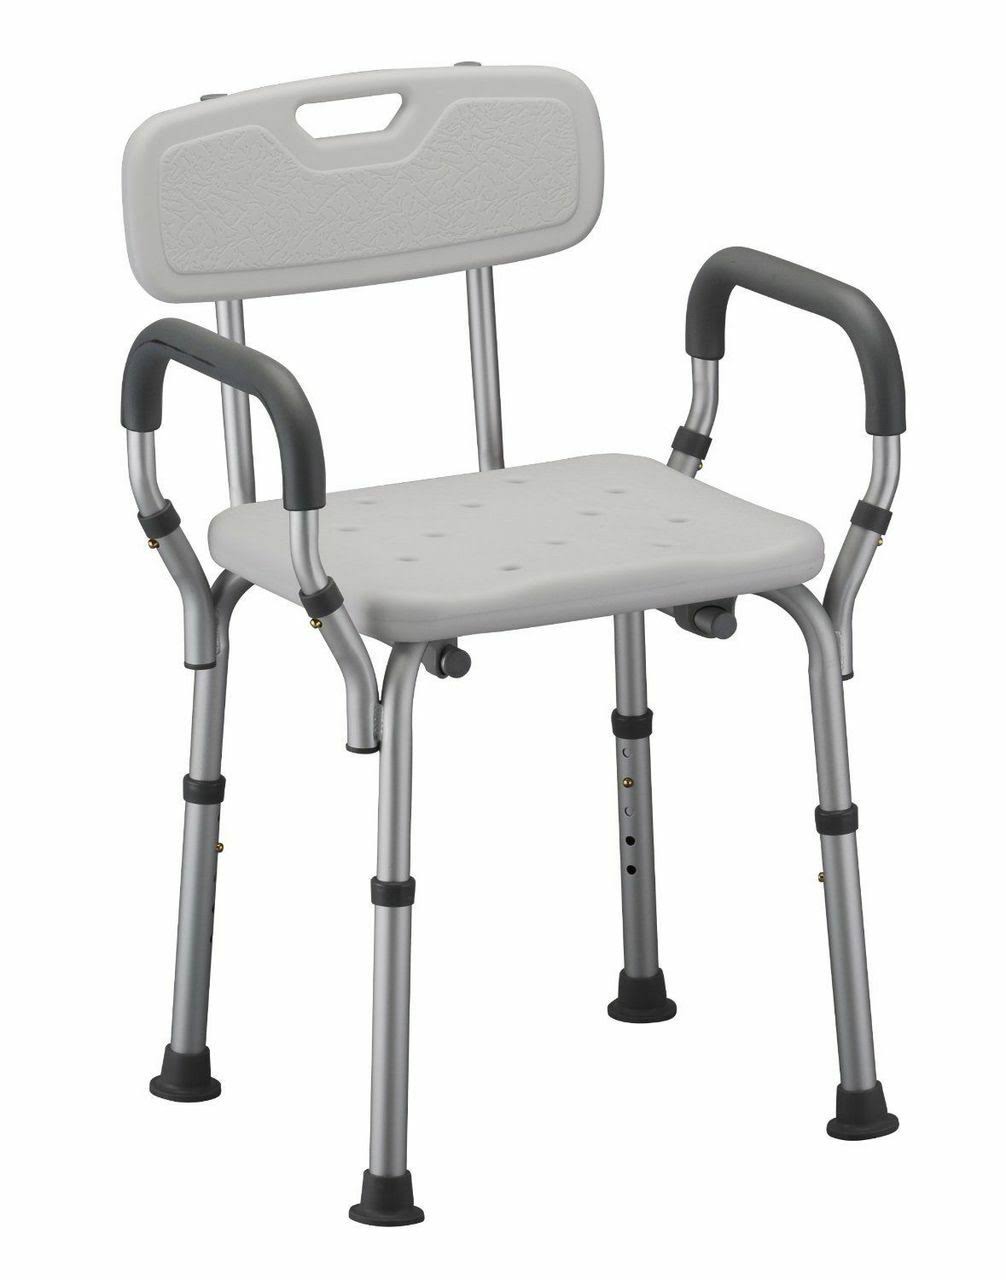 Nova Medical Products 9026 Quick Release Shower Chair - White